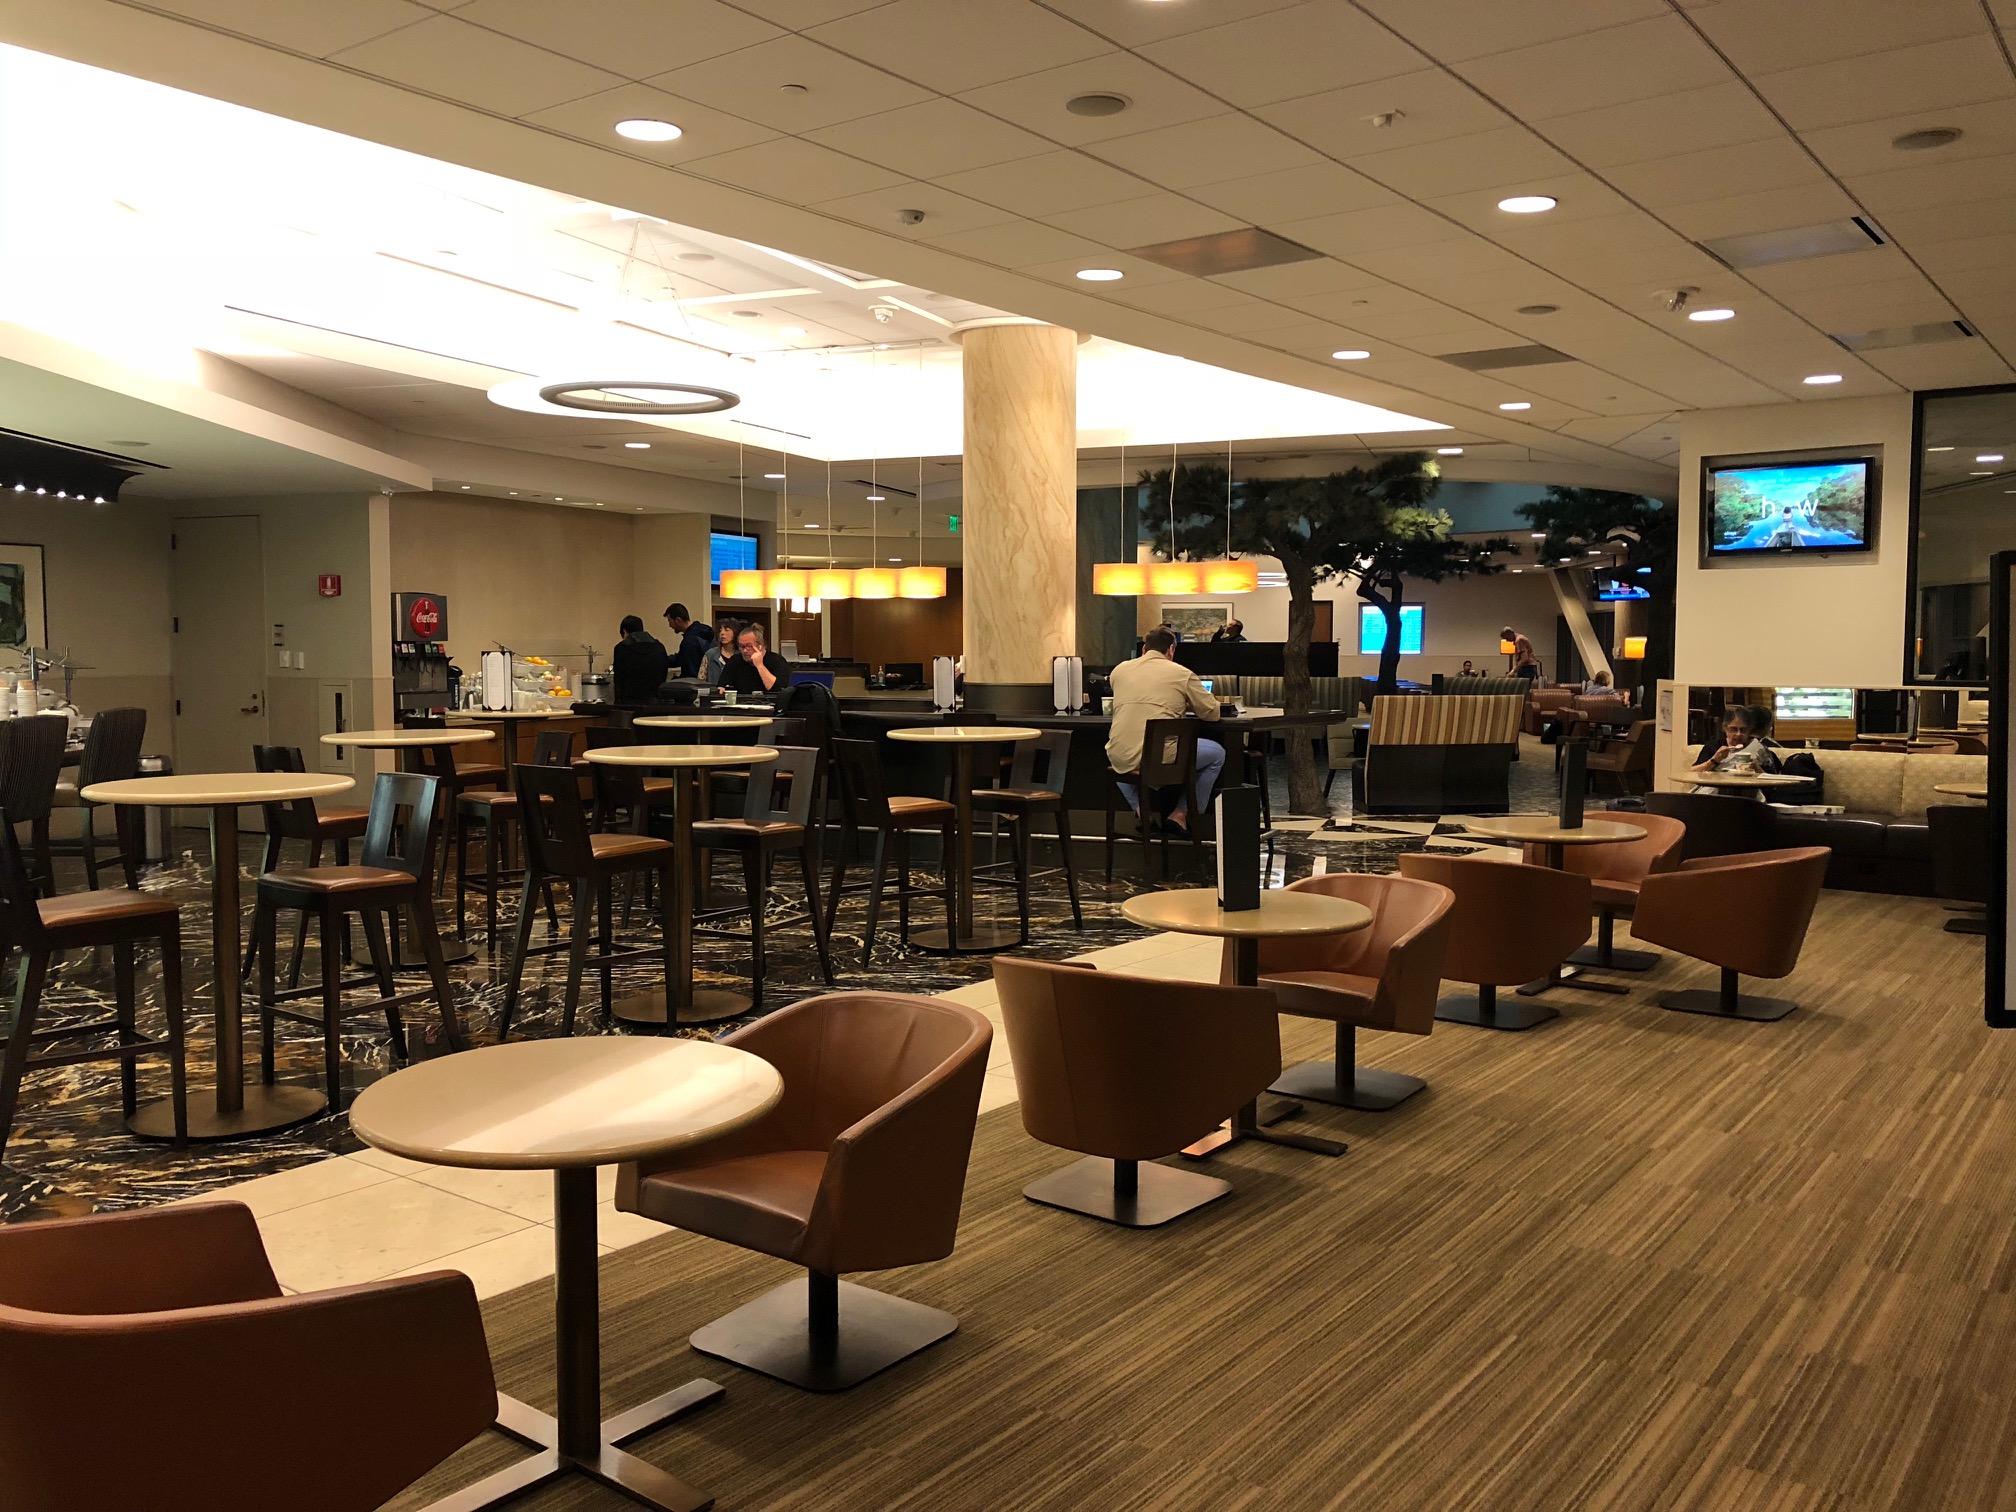 The American Airlines Admirals Club lounge in SFO 